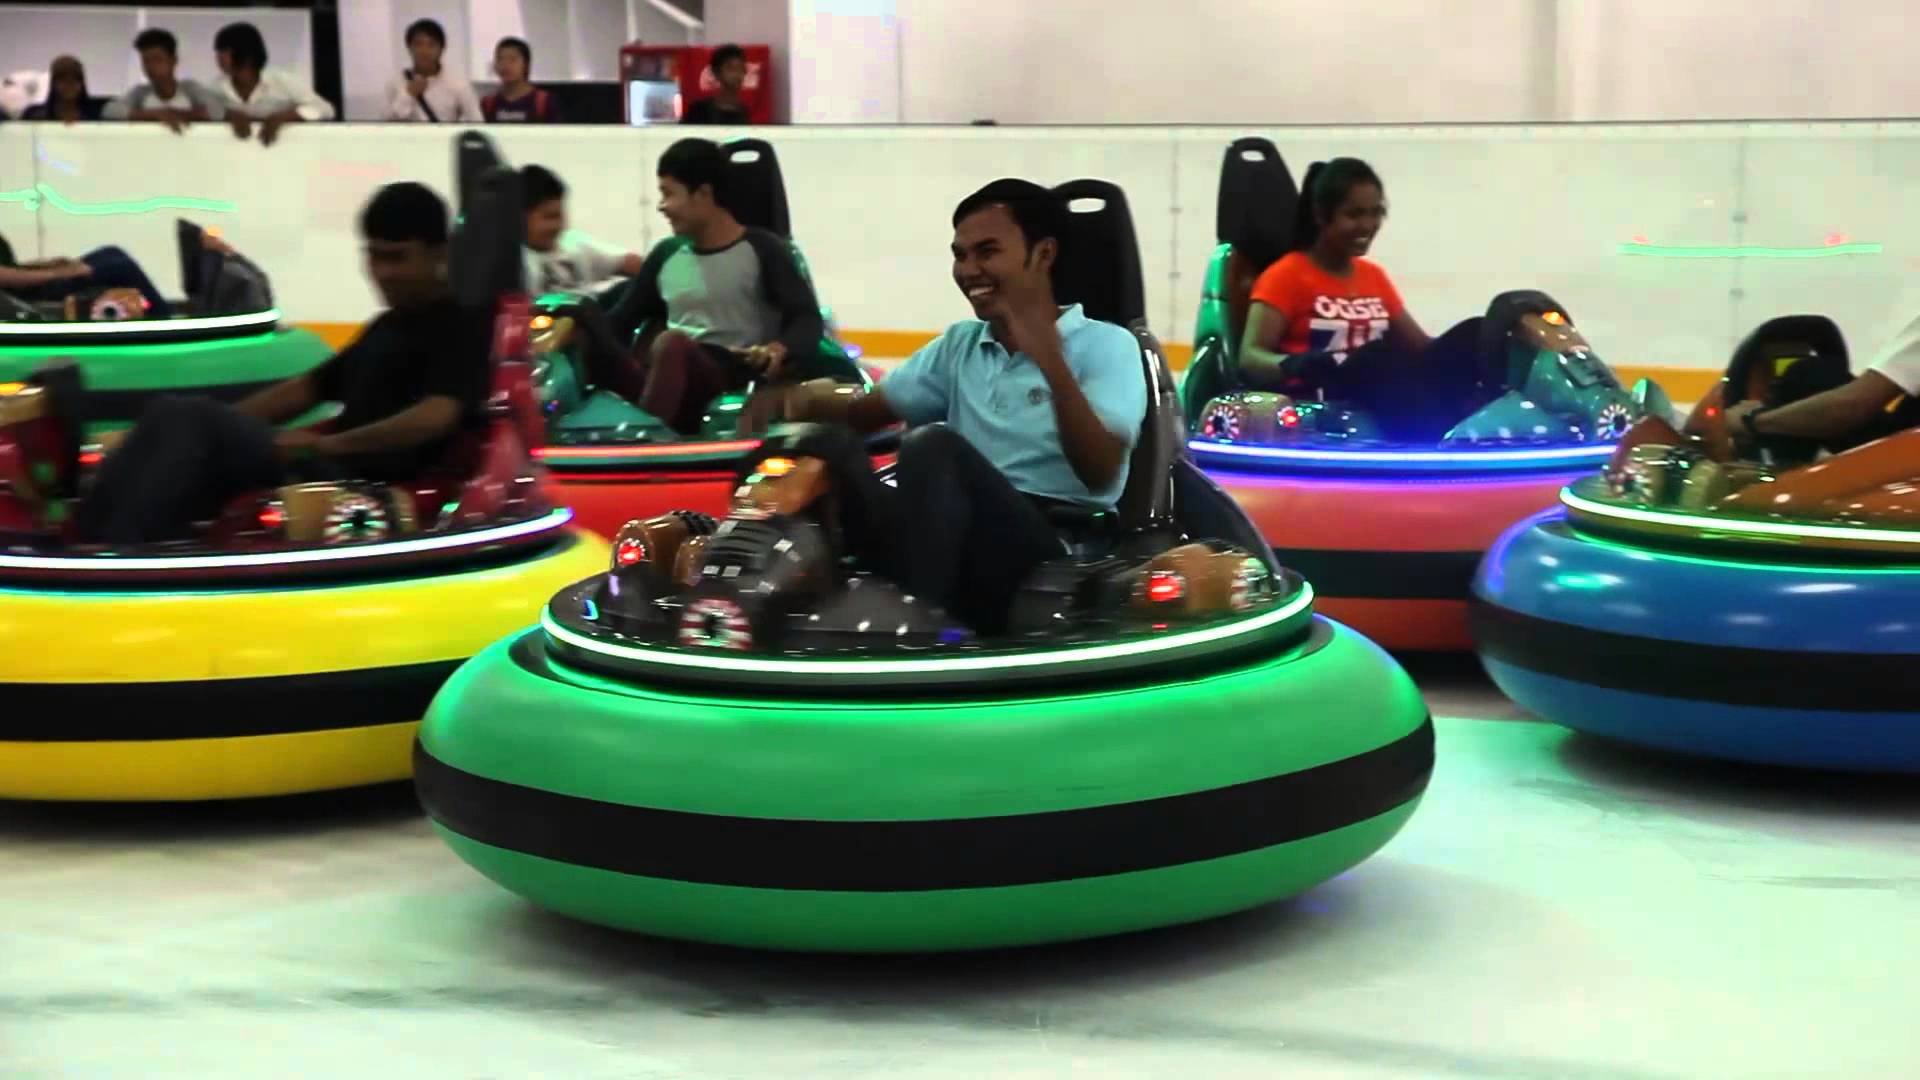 Inflatable UFO bumper cars for young people